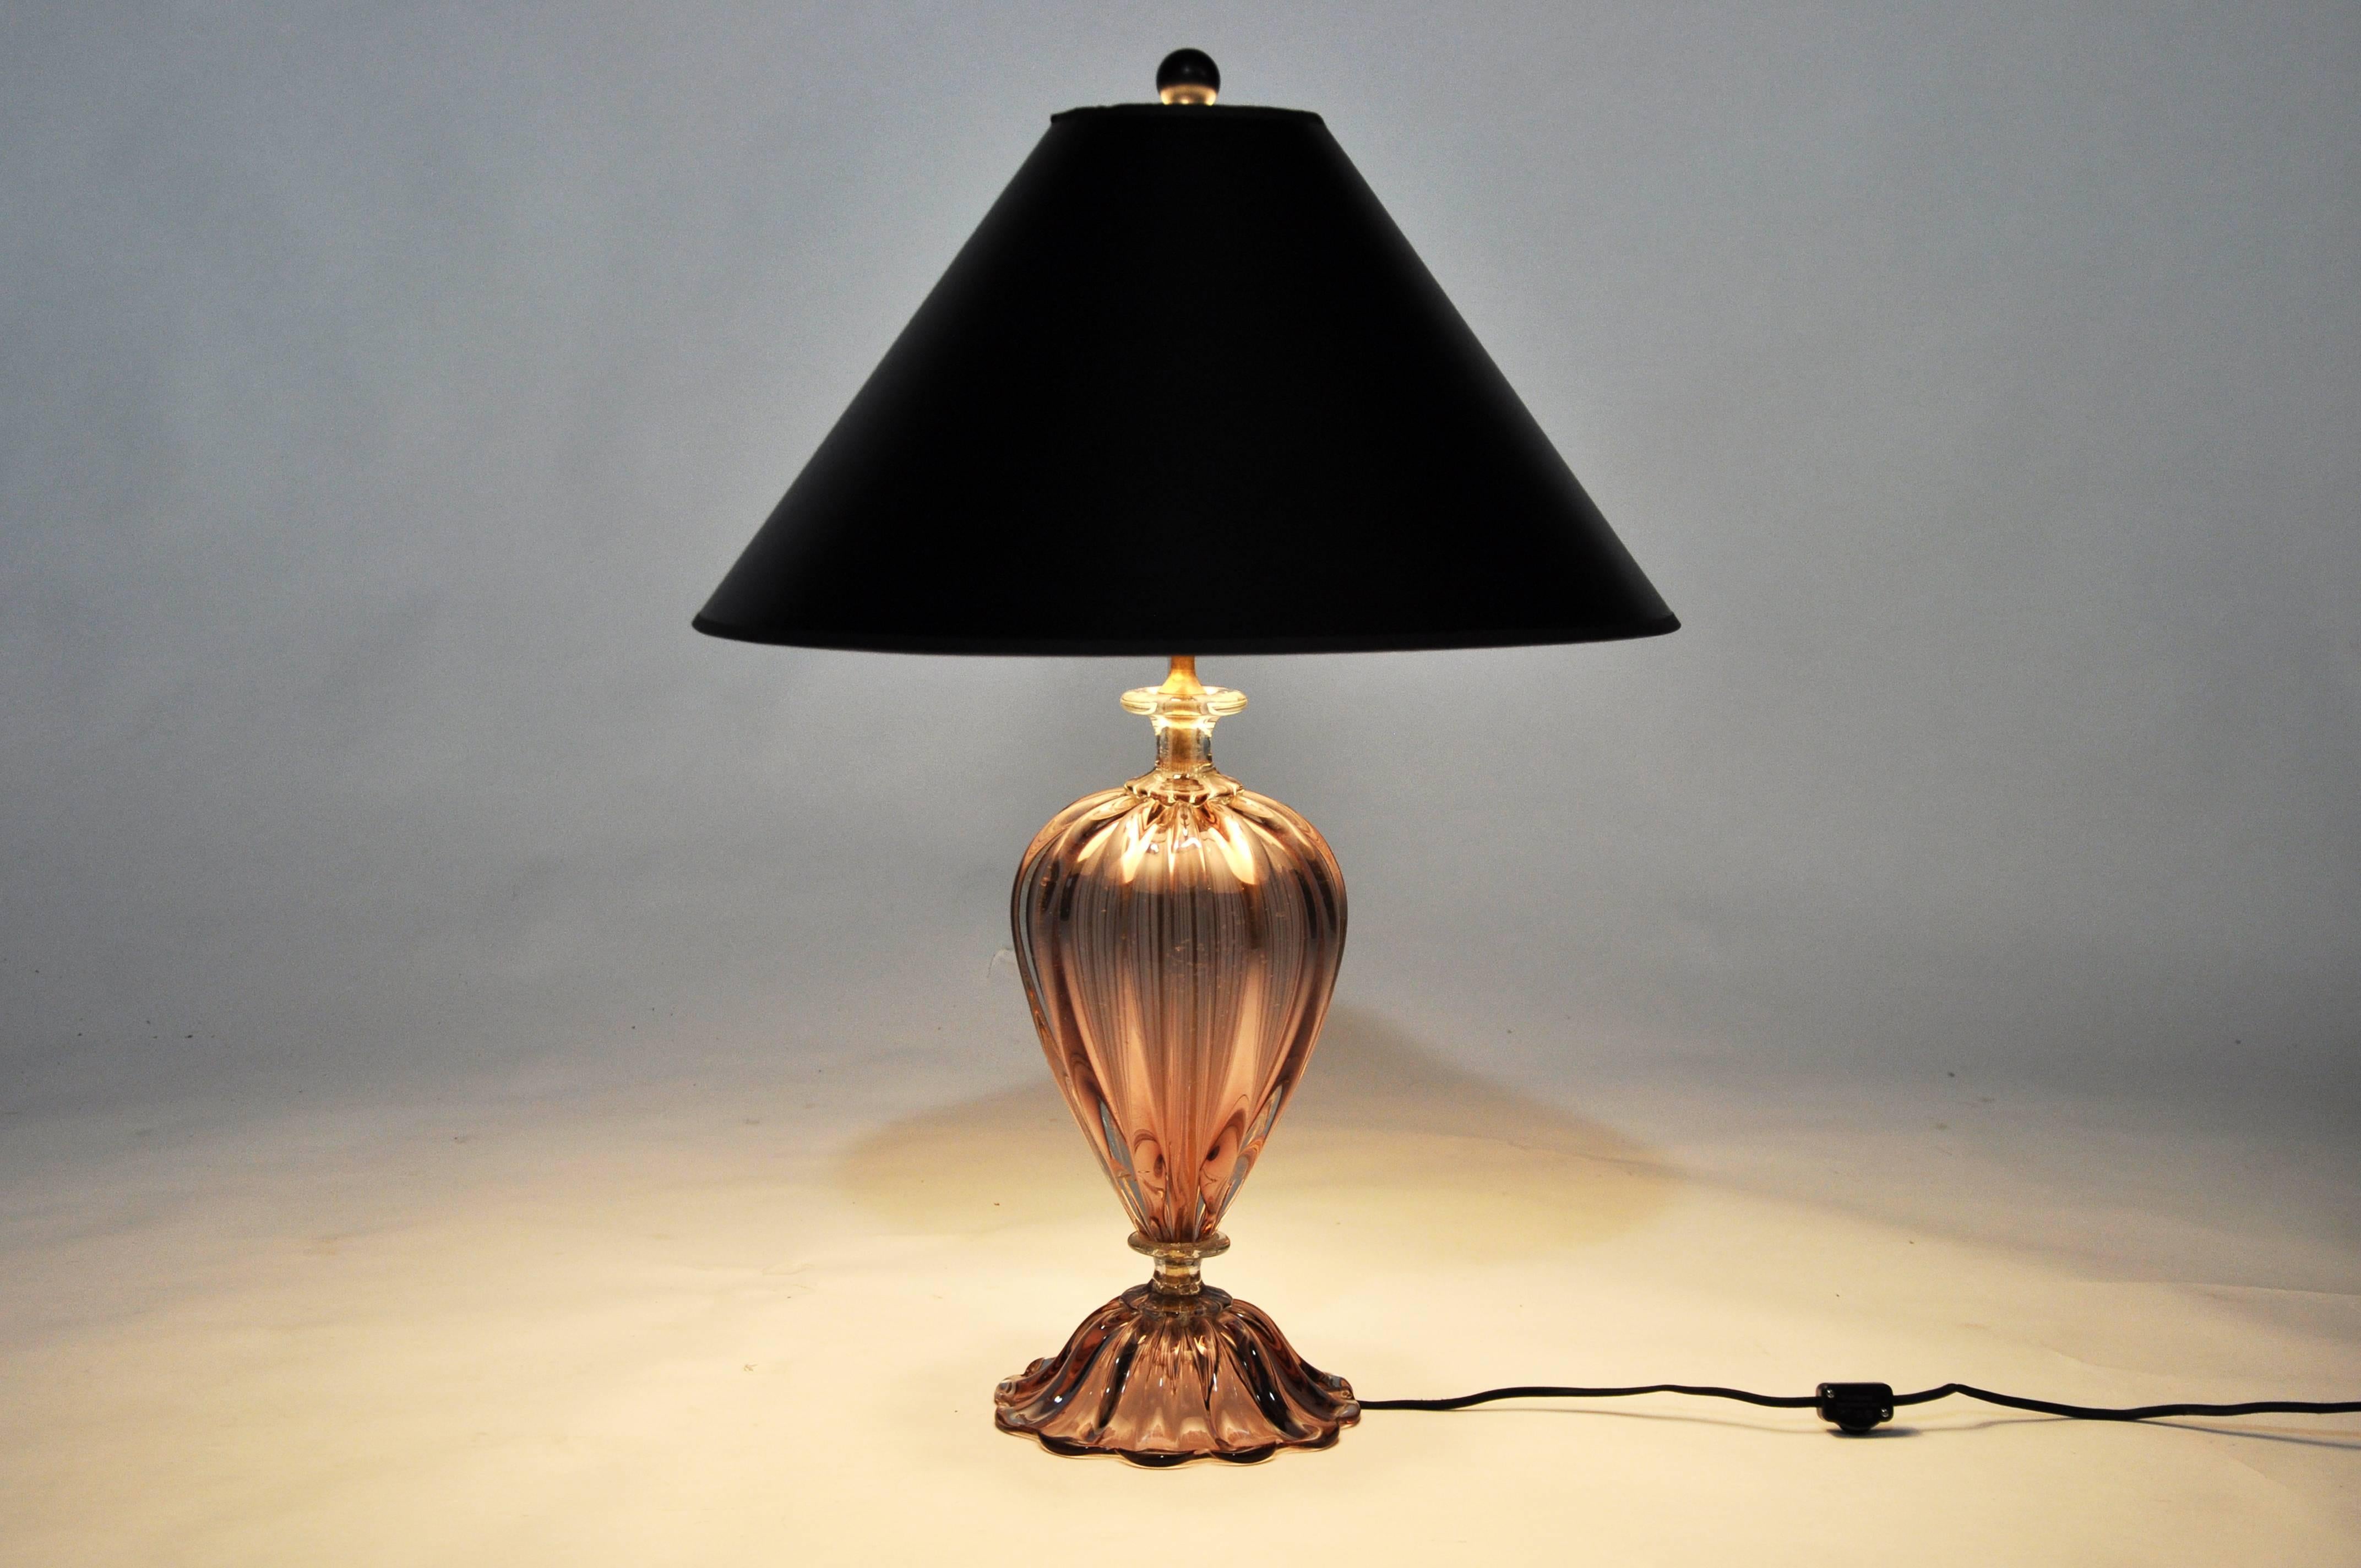 This elegant pair of Murano glass lamps by Bravier & Toso are from Italy, circa 1960. Barovier & Toso is an Italian company that specializes in Venetian glass. The company is one of the oldest family businesses in the world, founded in 1295 as